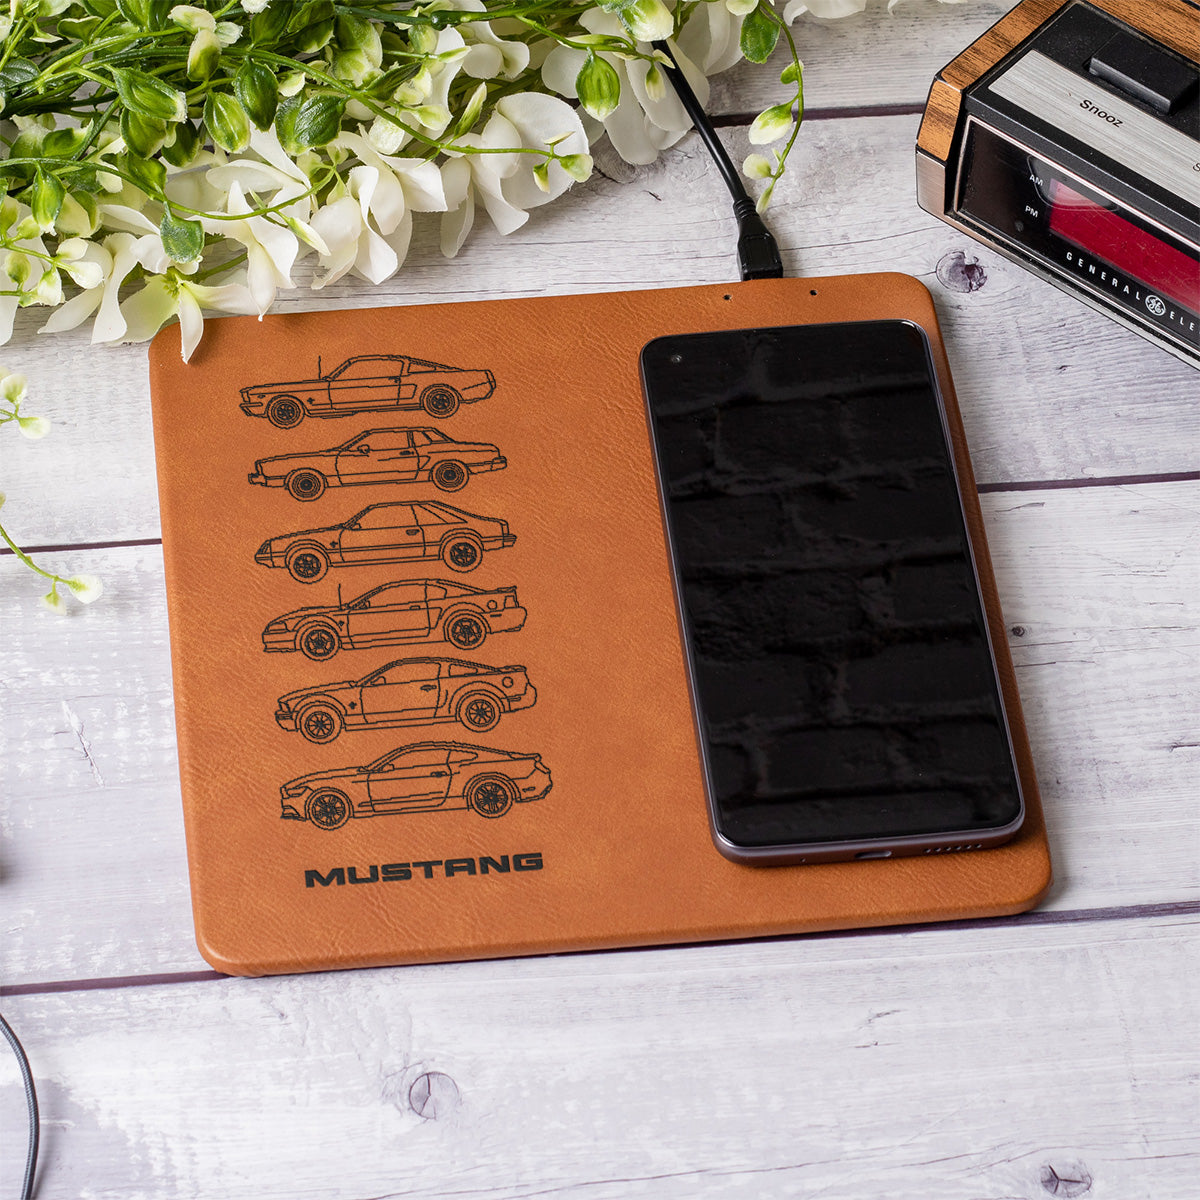 Mustang Silhouette Leather Wireless Phone Charging Mat